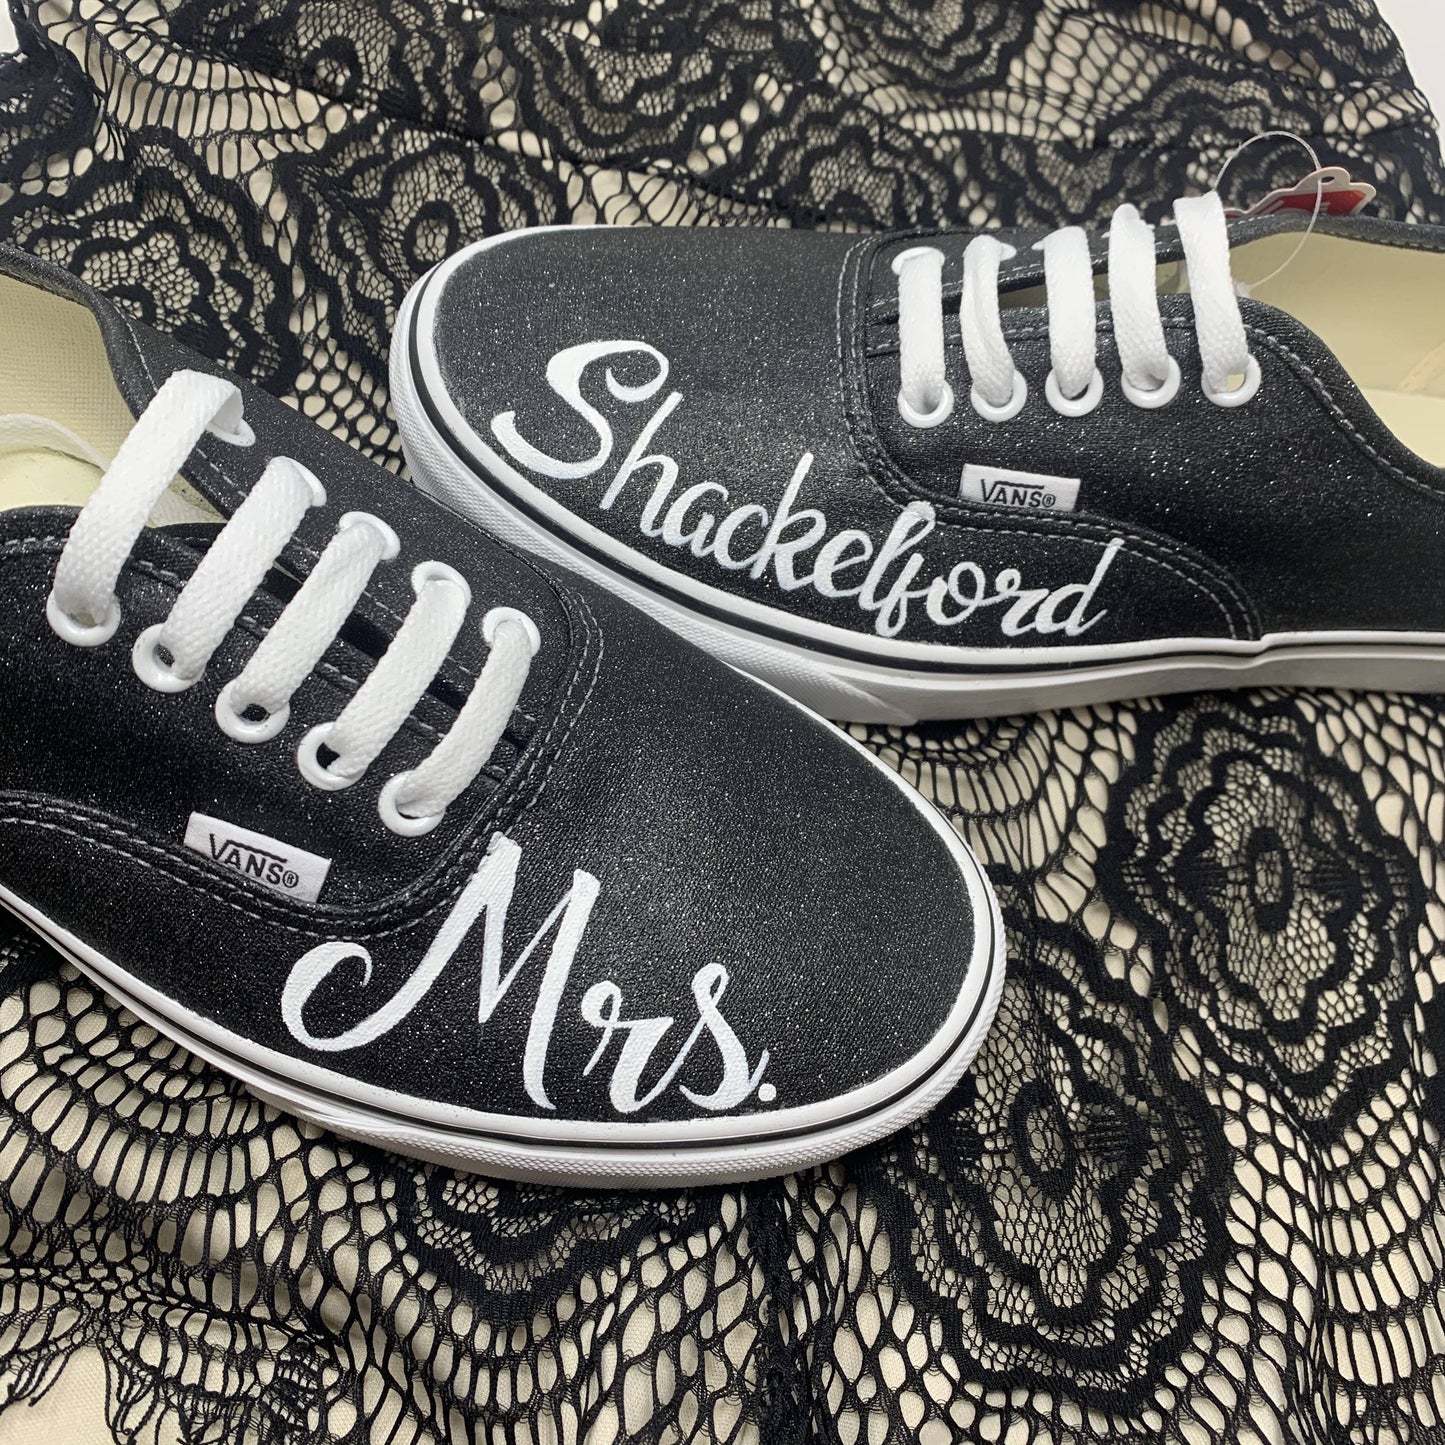 Mrs. Shackelford painted on a pair of Black Glitter Wedding laced Vans, with a black laced cloth underneath the shoes.